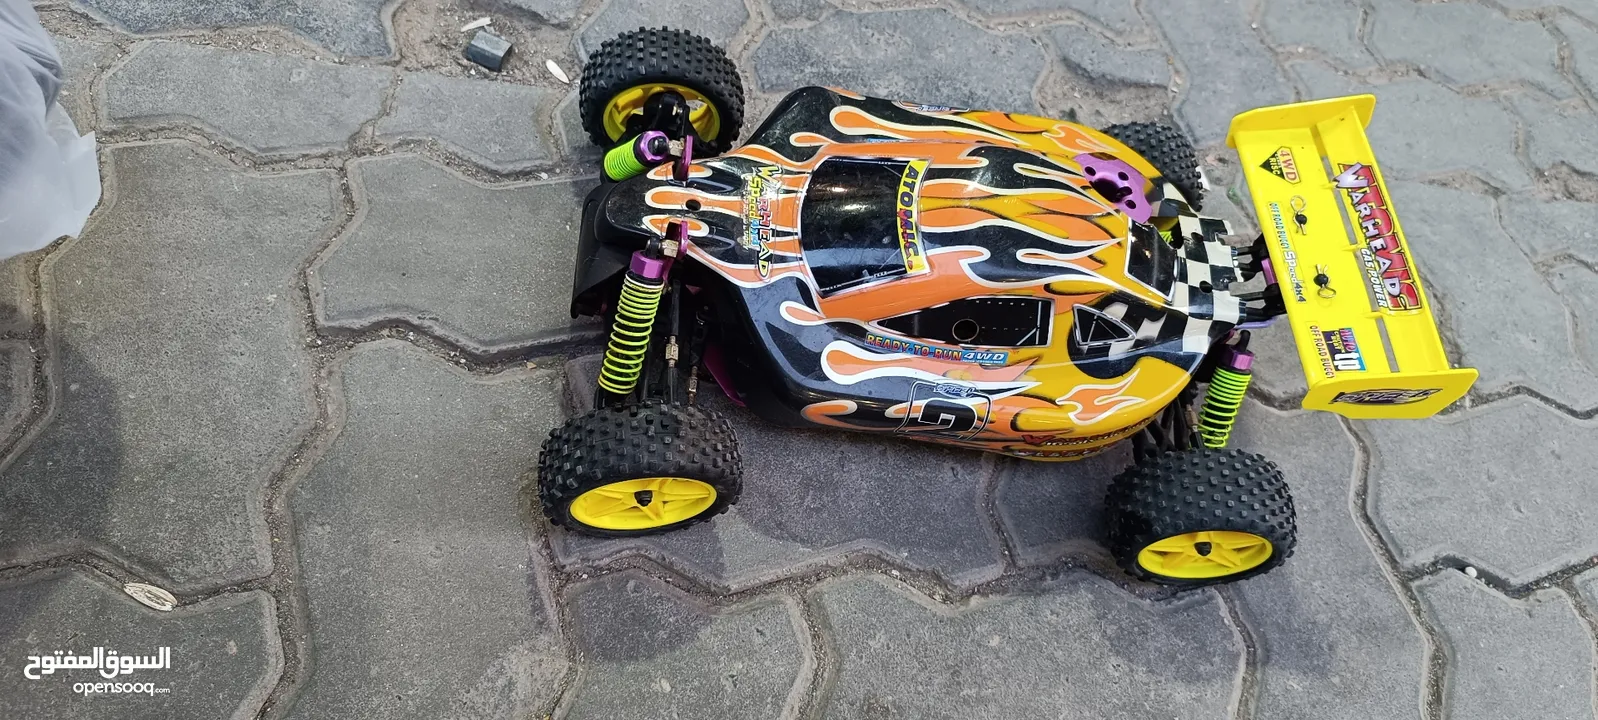 HSP 1/10 scale nitro RC buggy